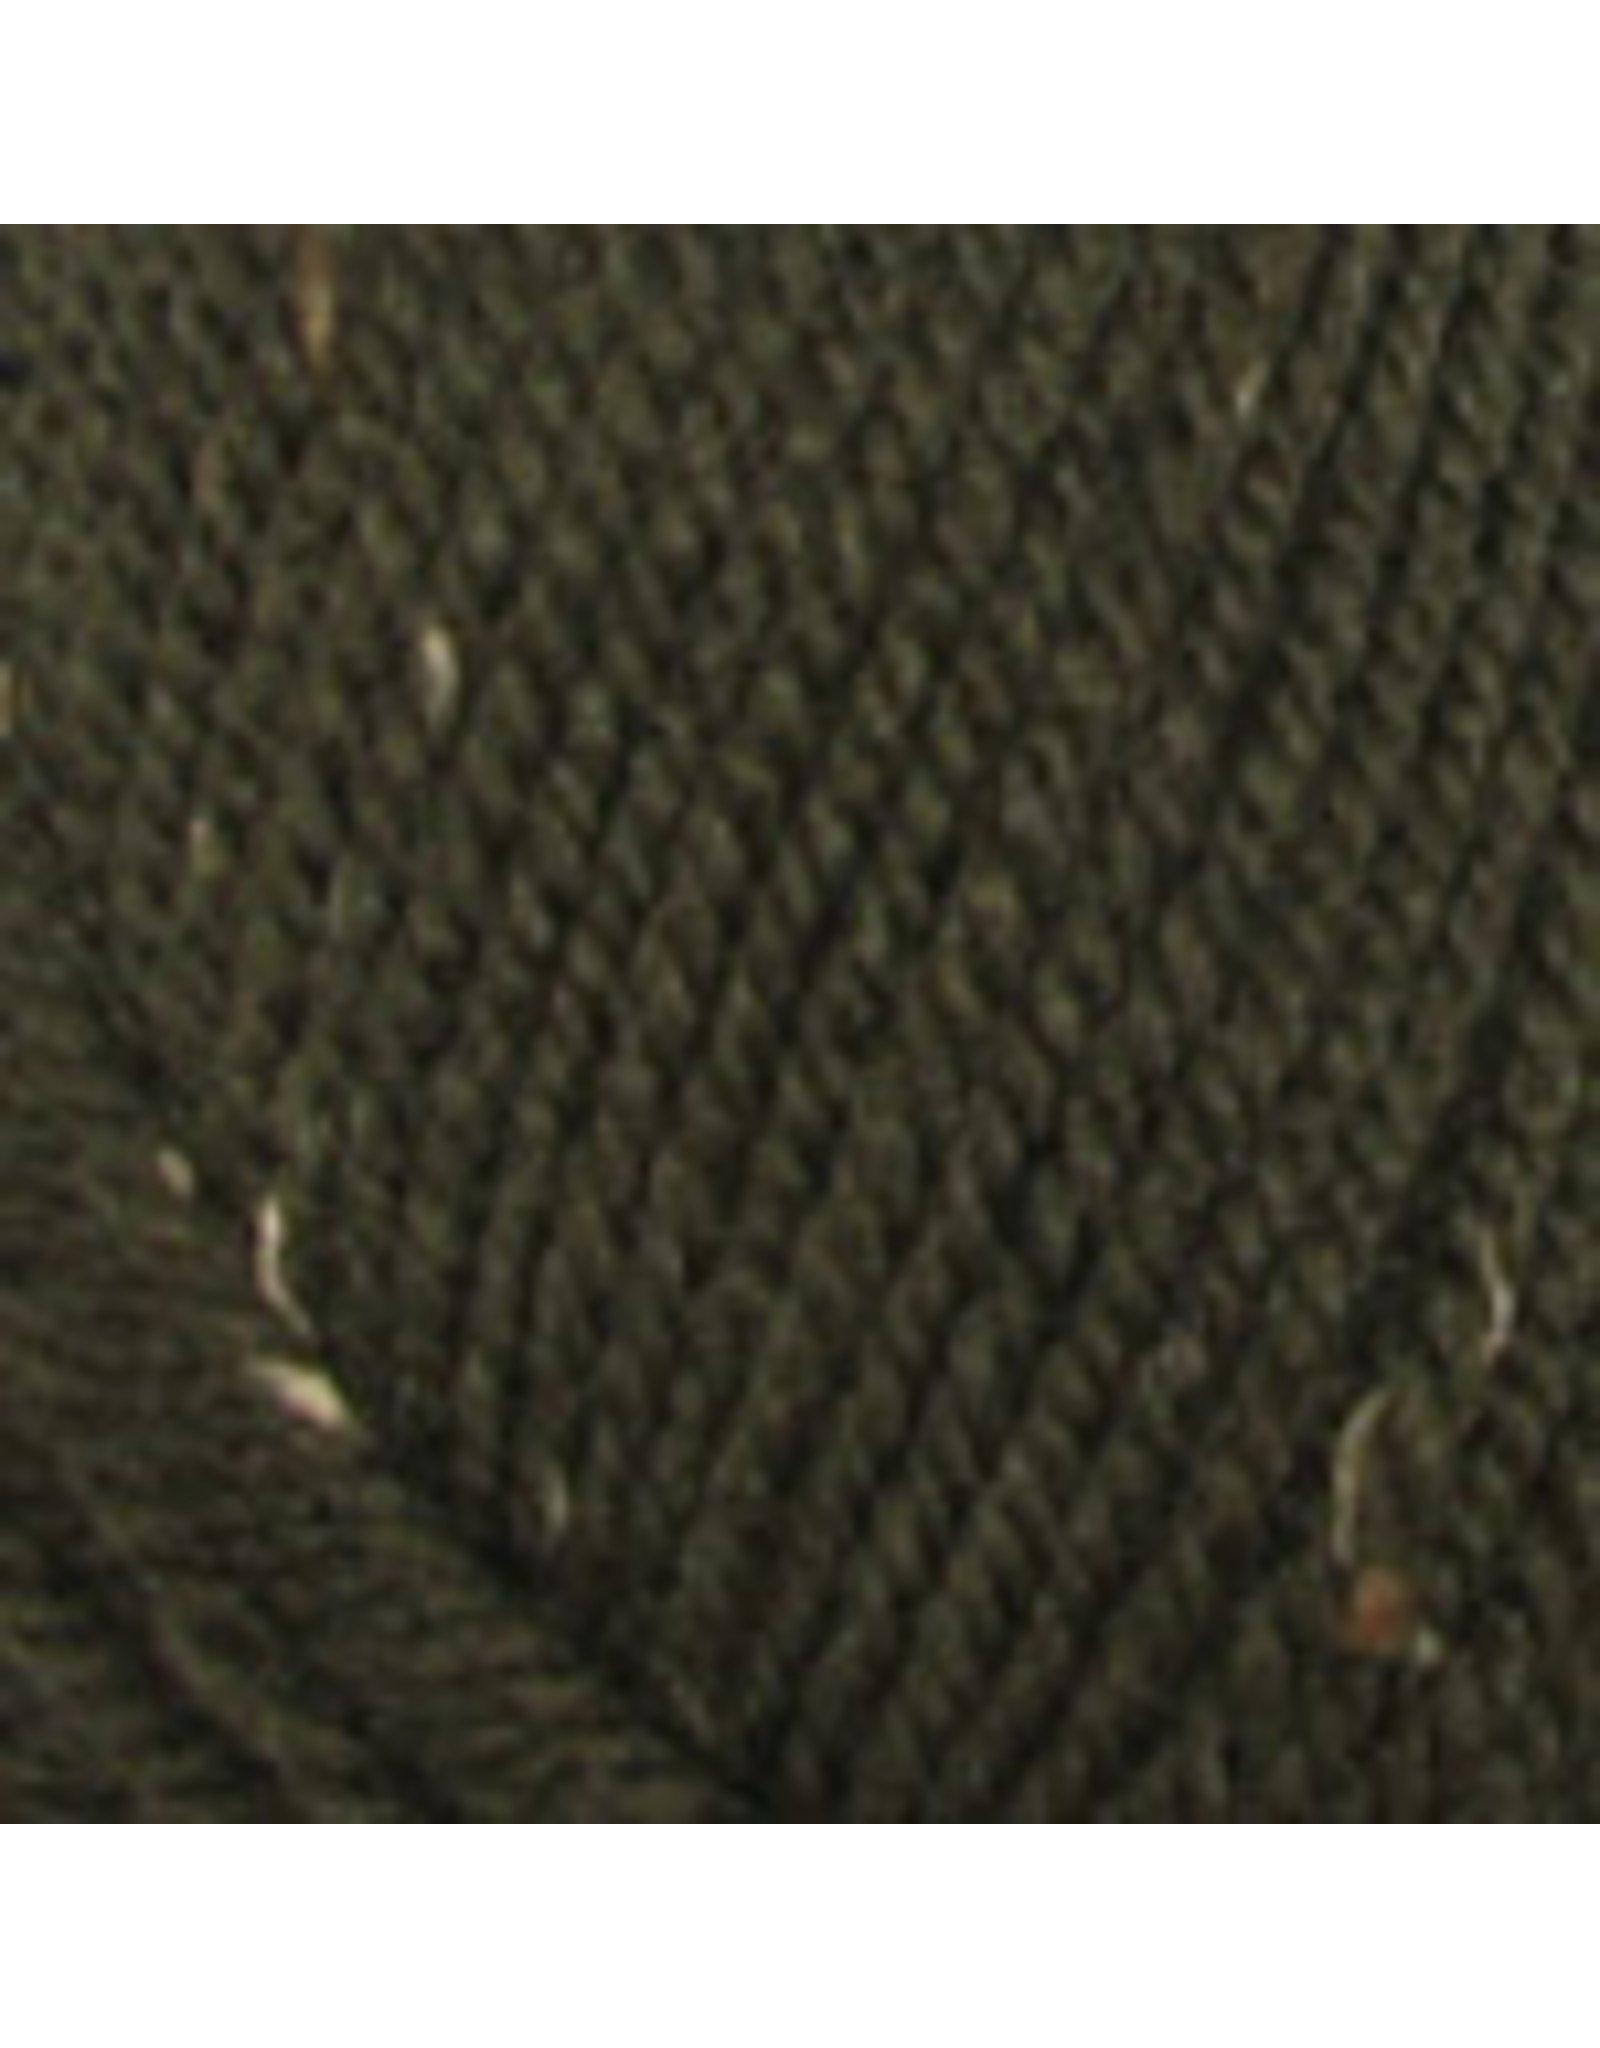 Plymouth Yarn Plymouth: Encore Tweed (Cools),